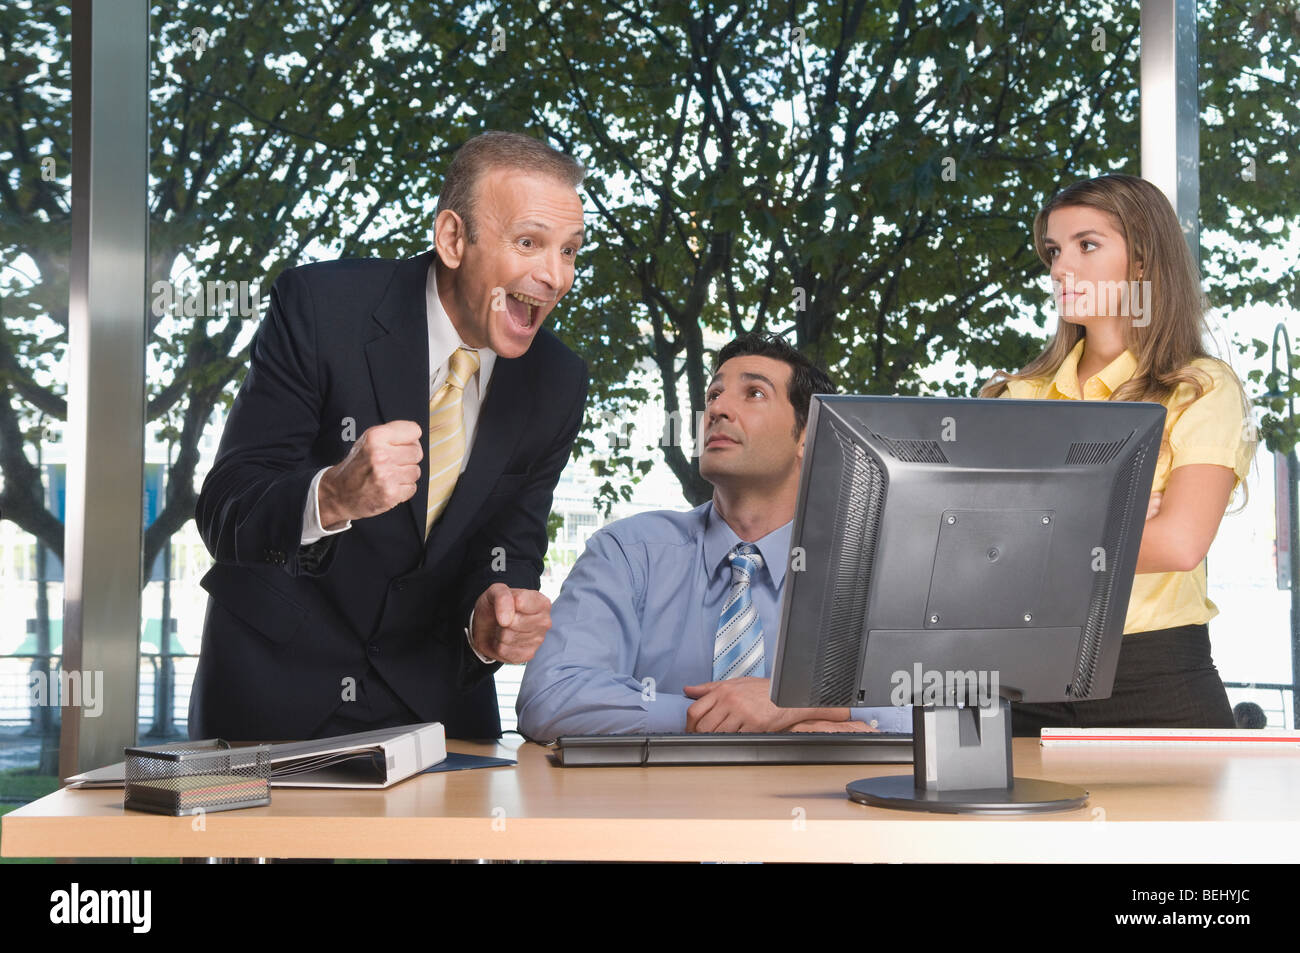 business executives in an office Stock Photo